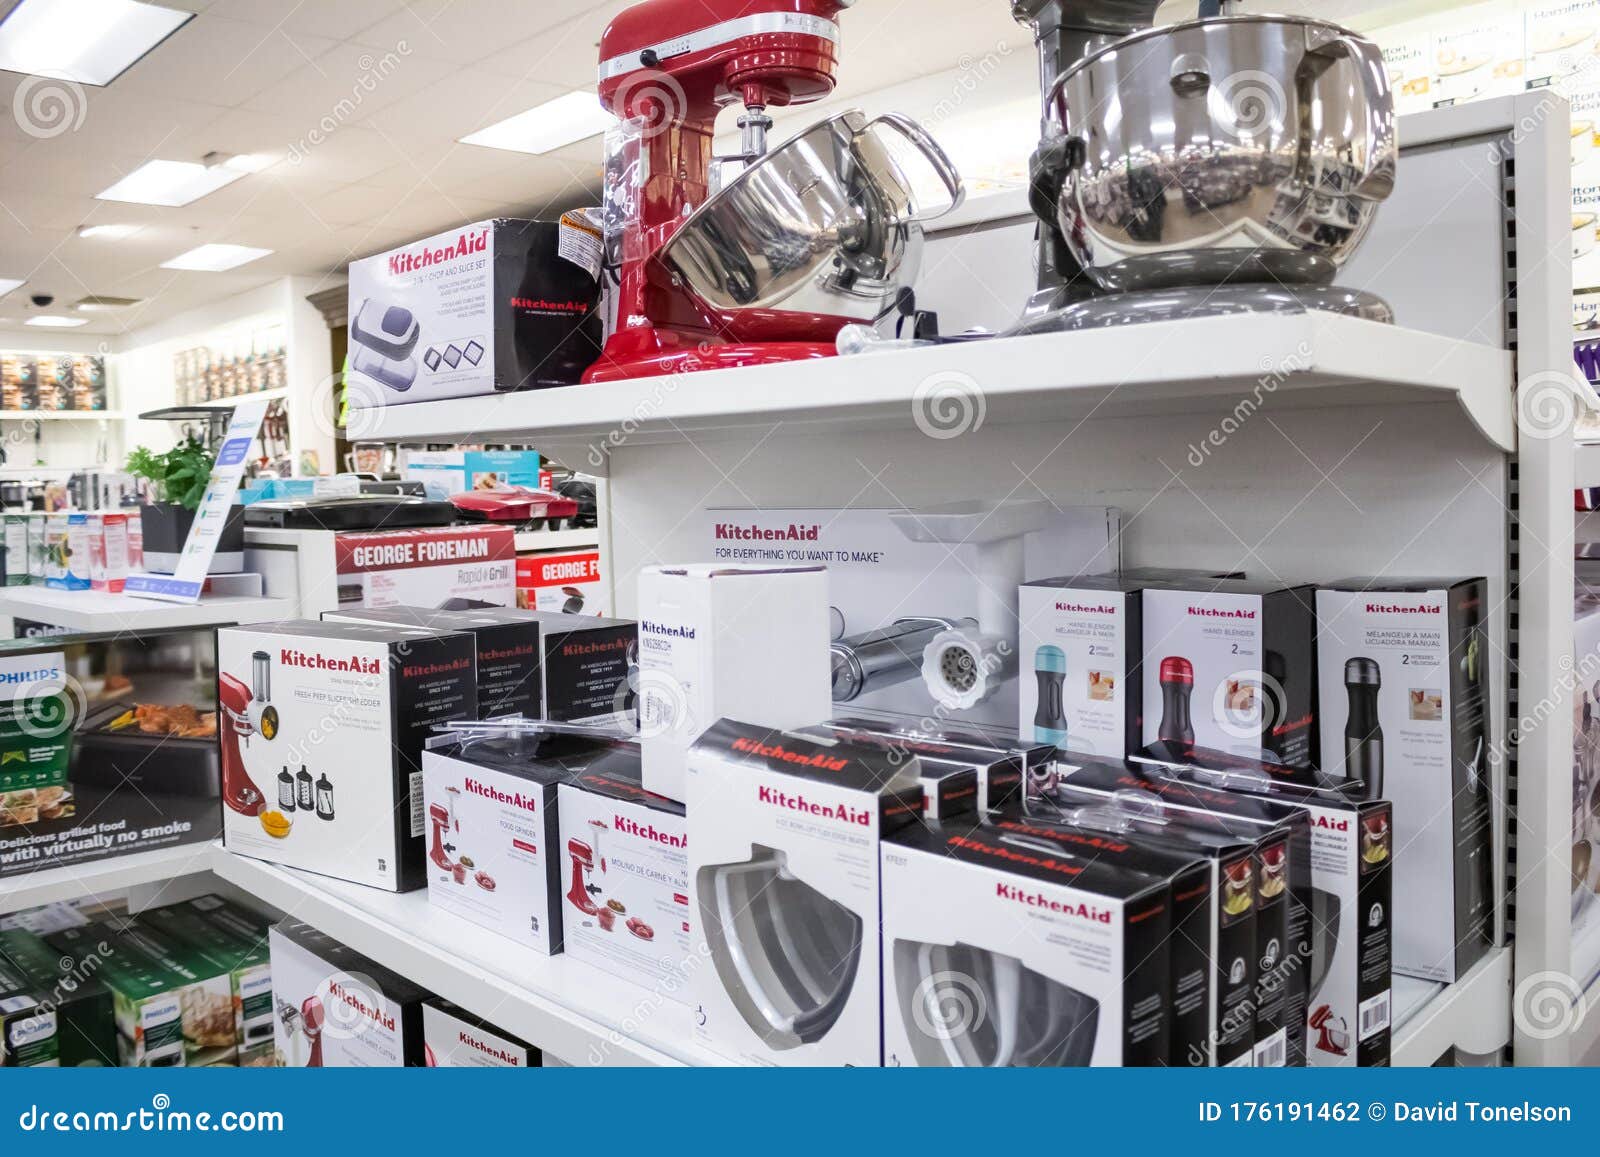 https://thumbs.dreamstime.com/z/view-display-kitchenaid-cookware-products-seen-local-department-store-los-angeles-california-kitchenaid-products-176191462.jpg